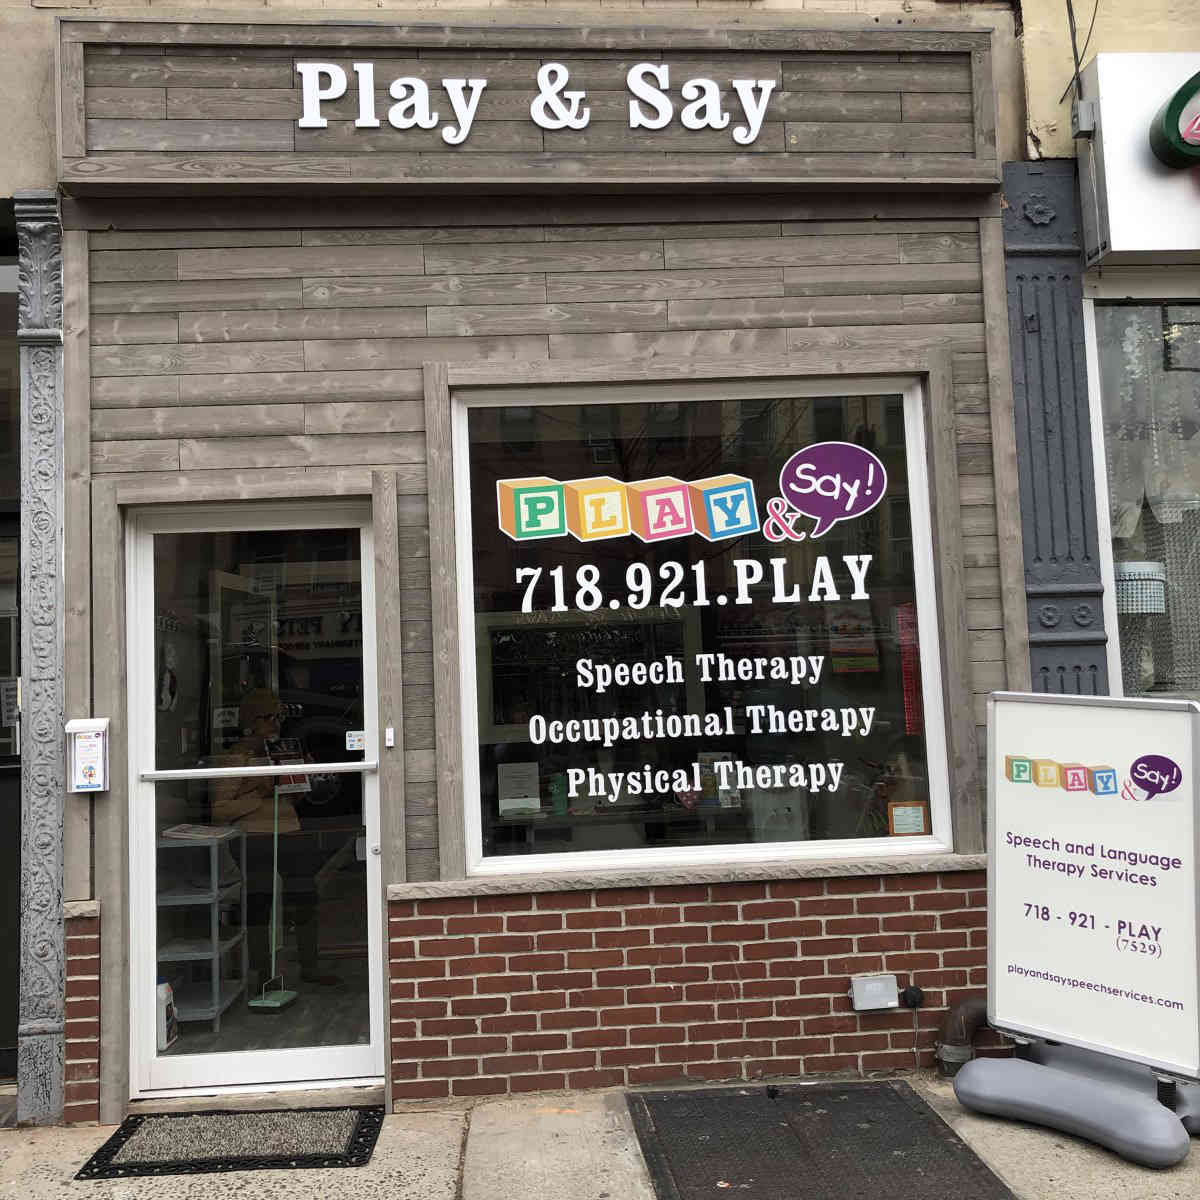 Bay Ridge Kids Therapy Practice Expands To Bigger Space